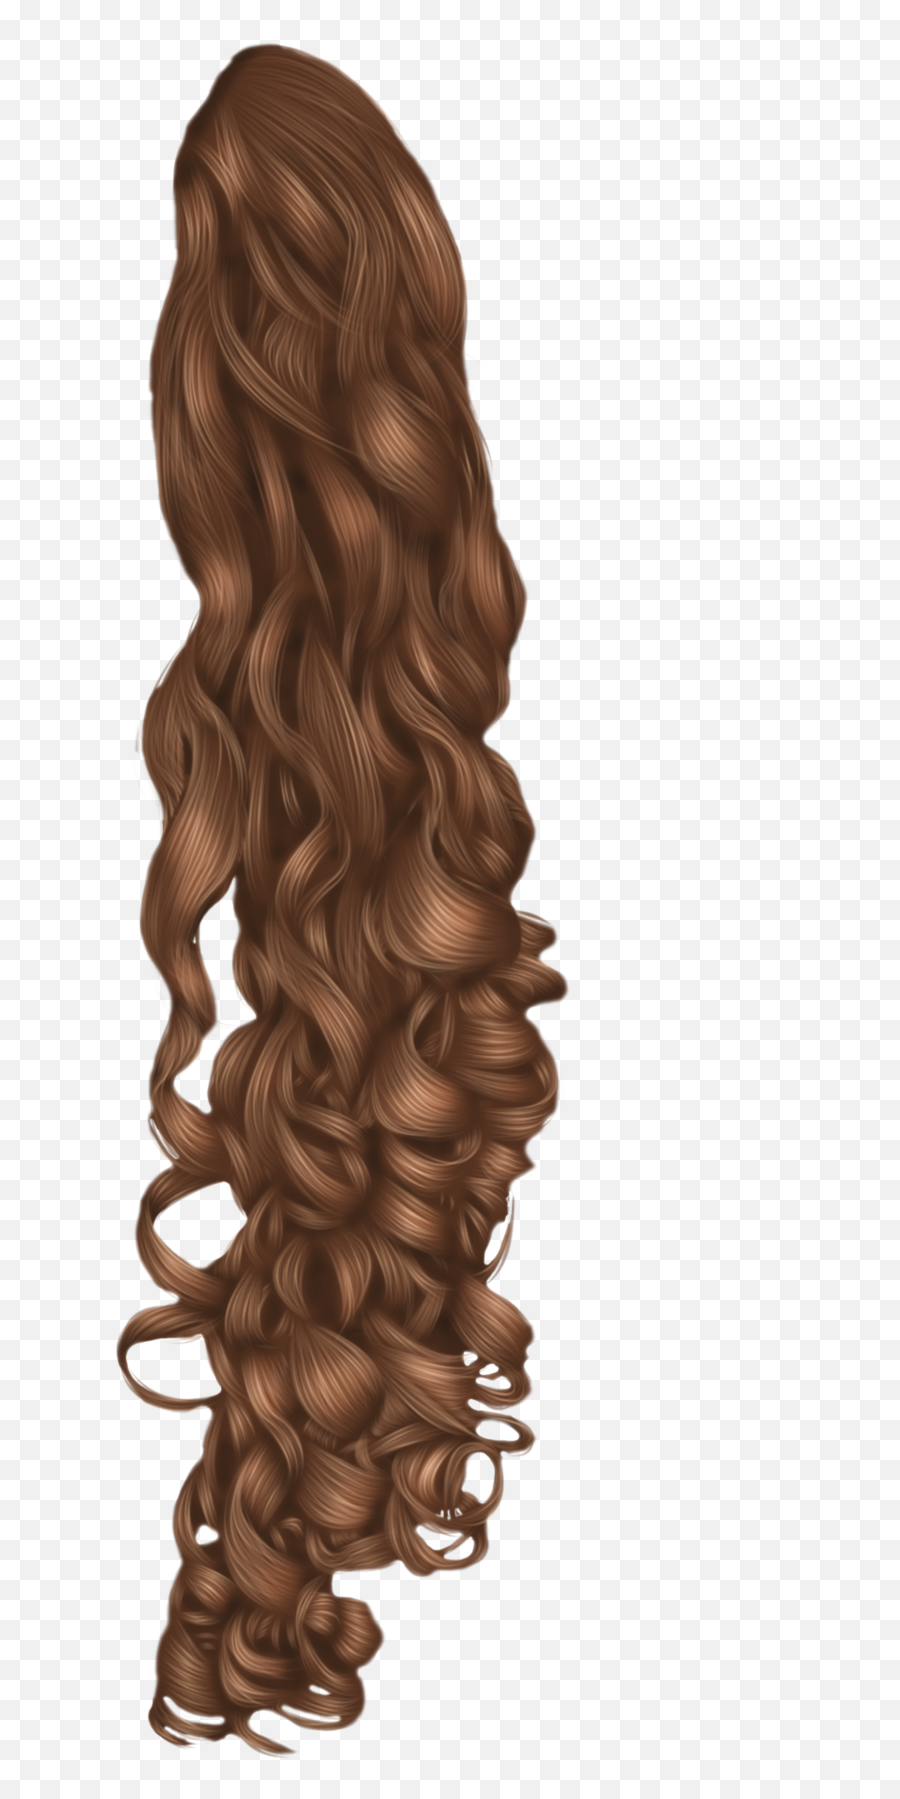 Black Hair Wig Hairstyle - Long Curly Hair Png,Curly Hair Png